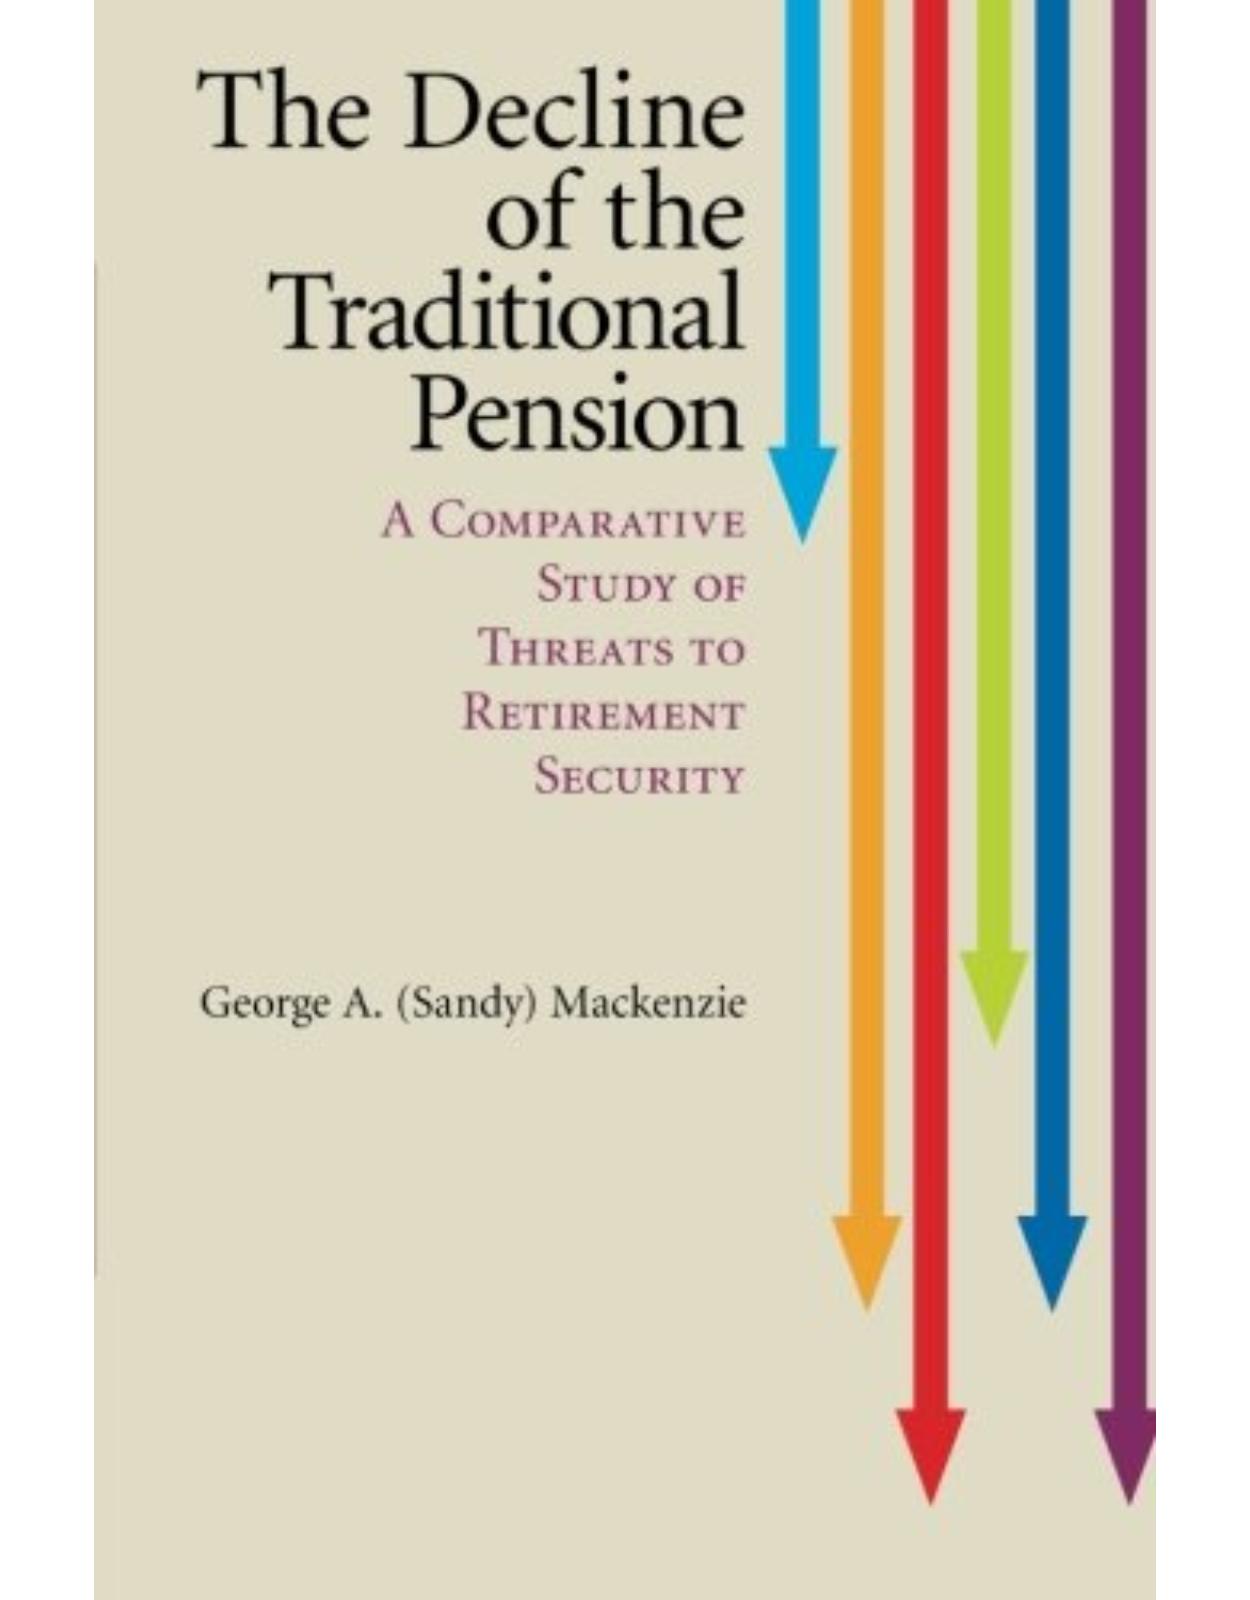 The Decline of the Traditional Pension: A Comparative Study of Threats to Retirement Security